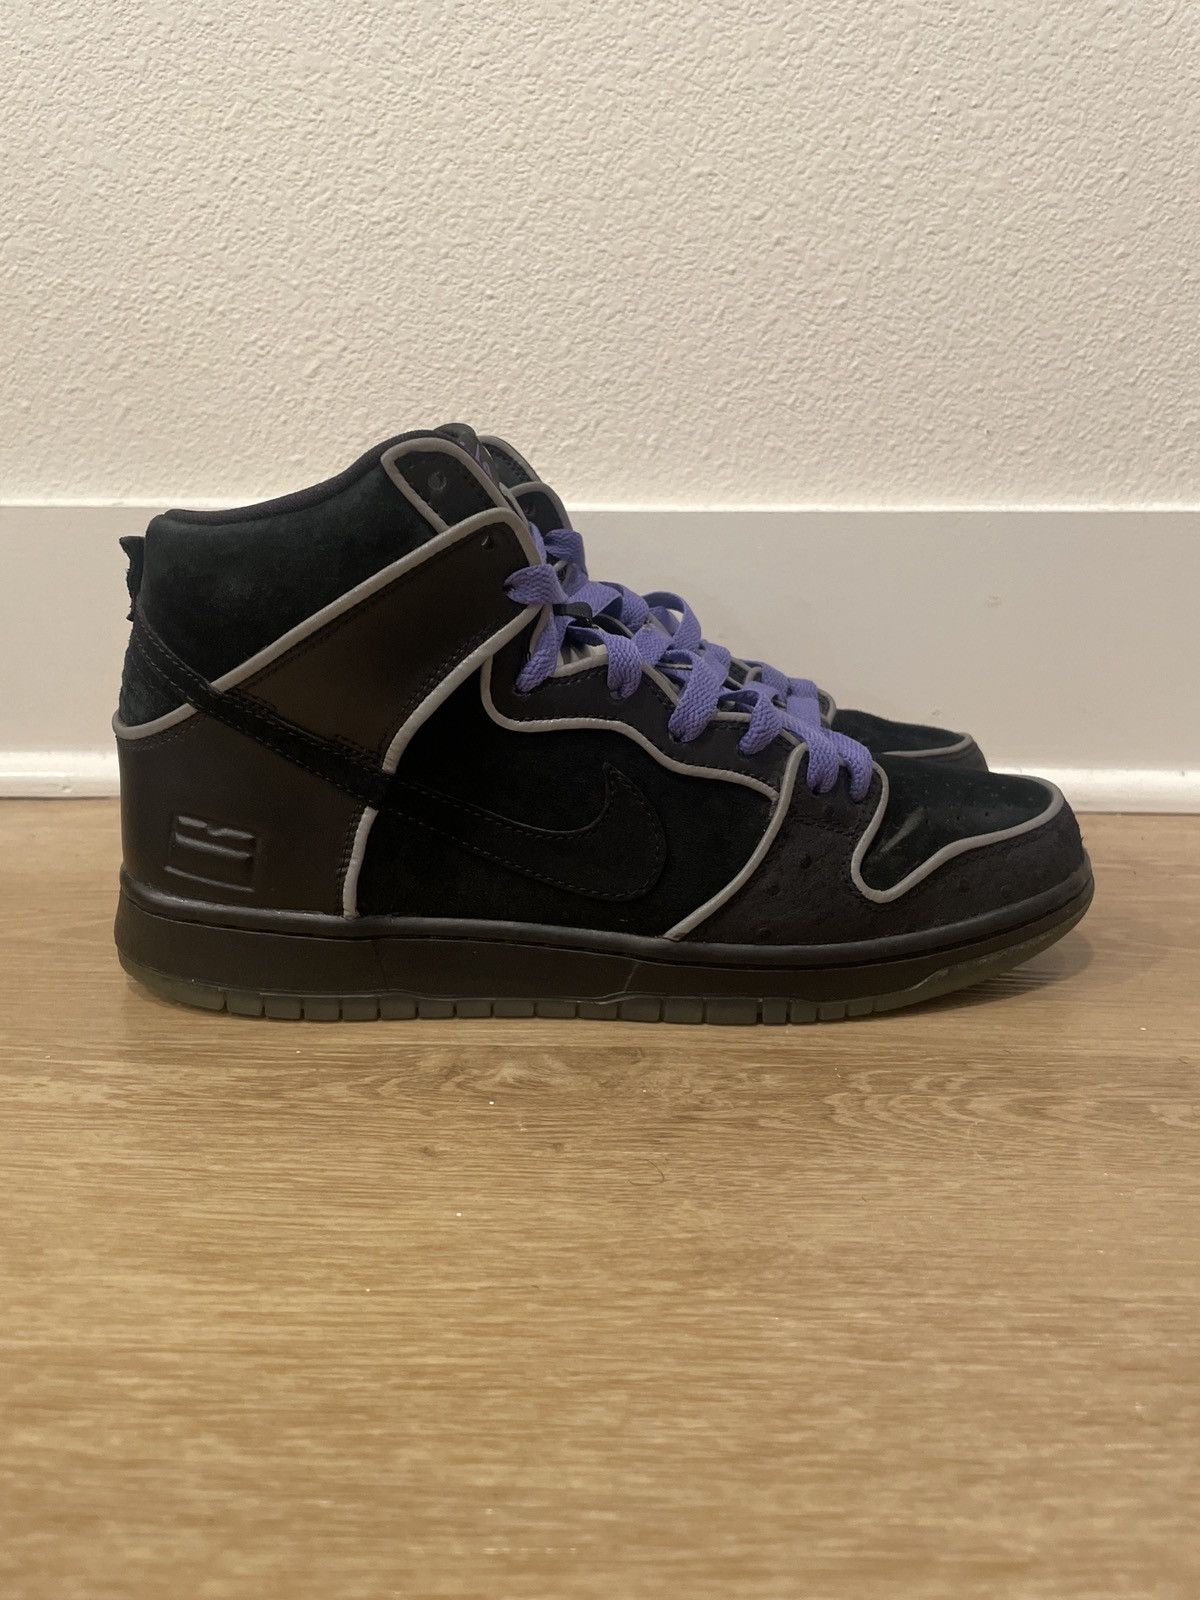 Pre-owned Nike Dunk Sb Purple Box Shoes In Black